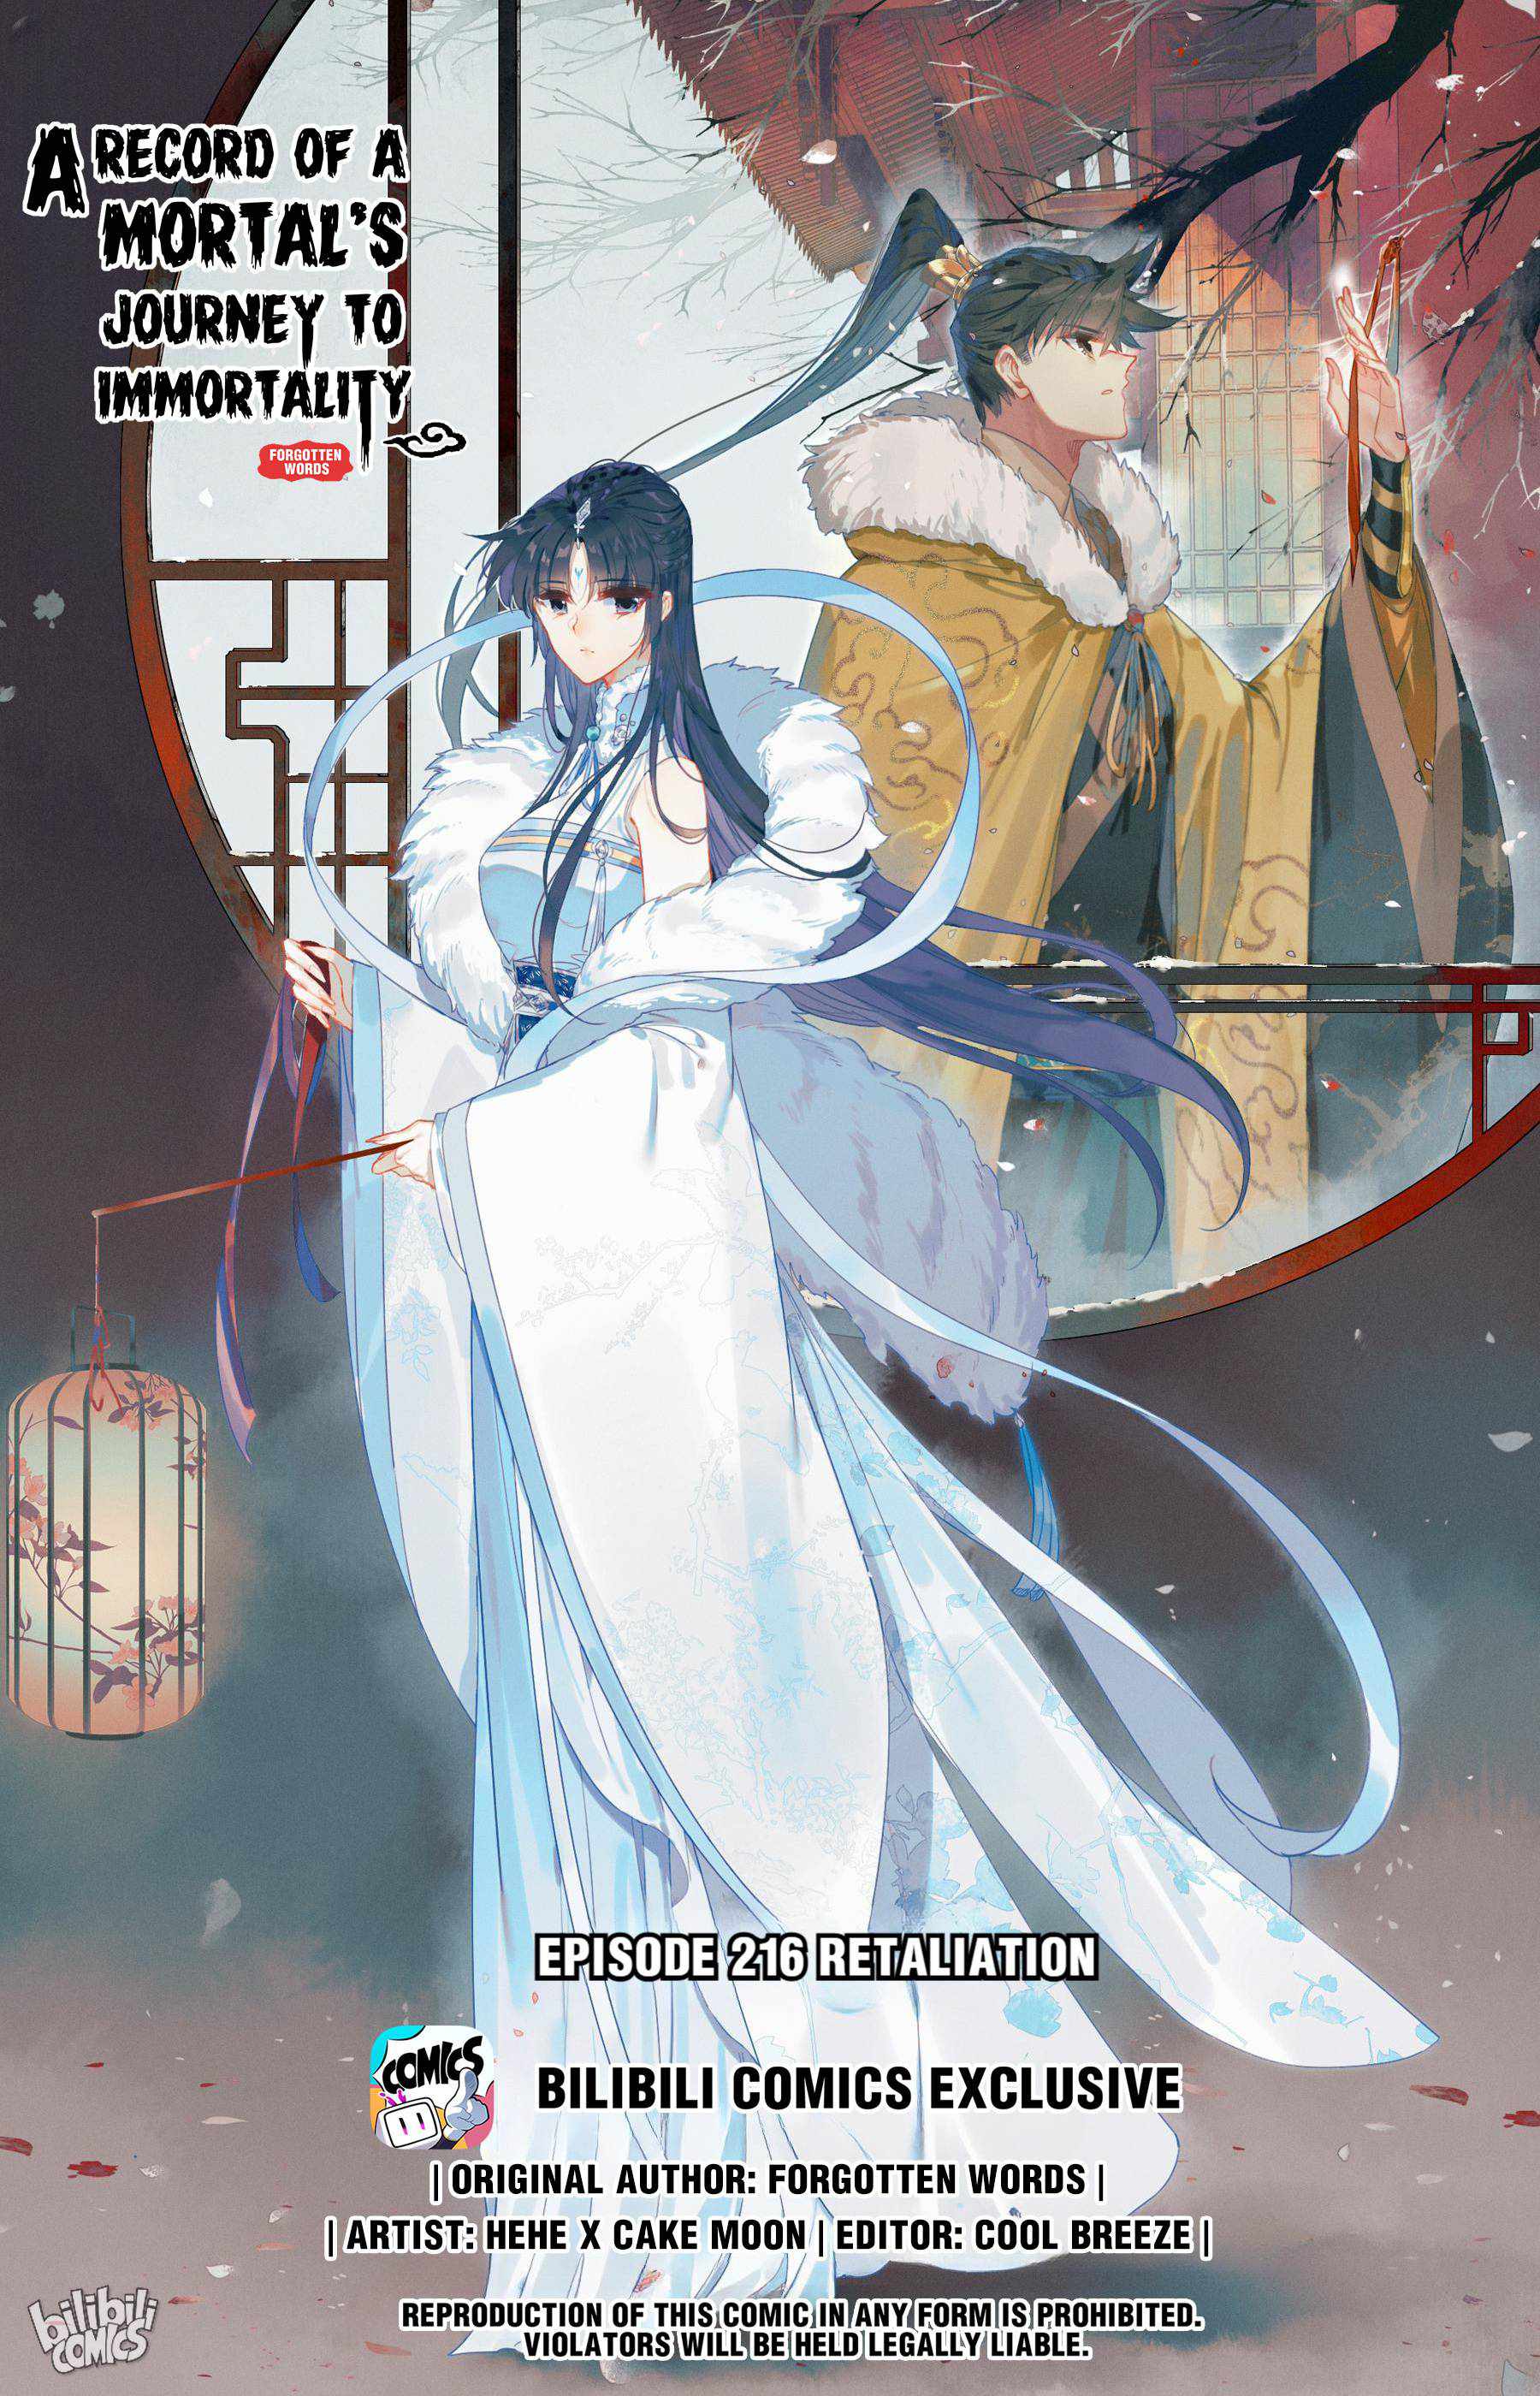 Mortal's Cultivation: journey to immortality Chapter 216